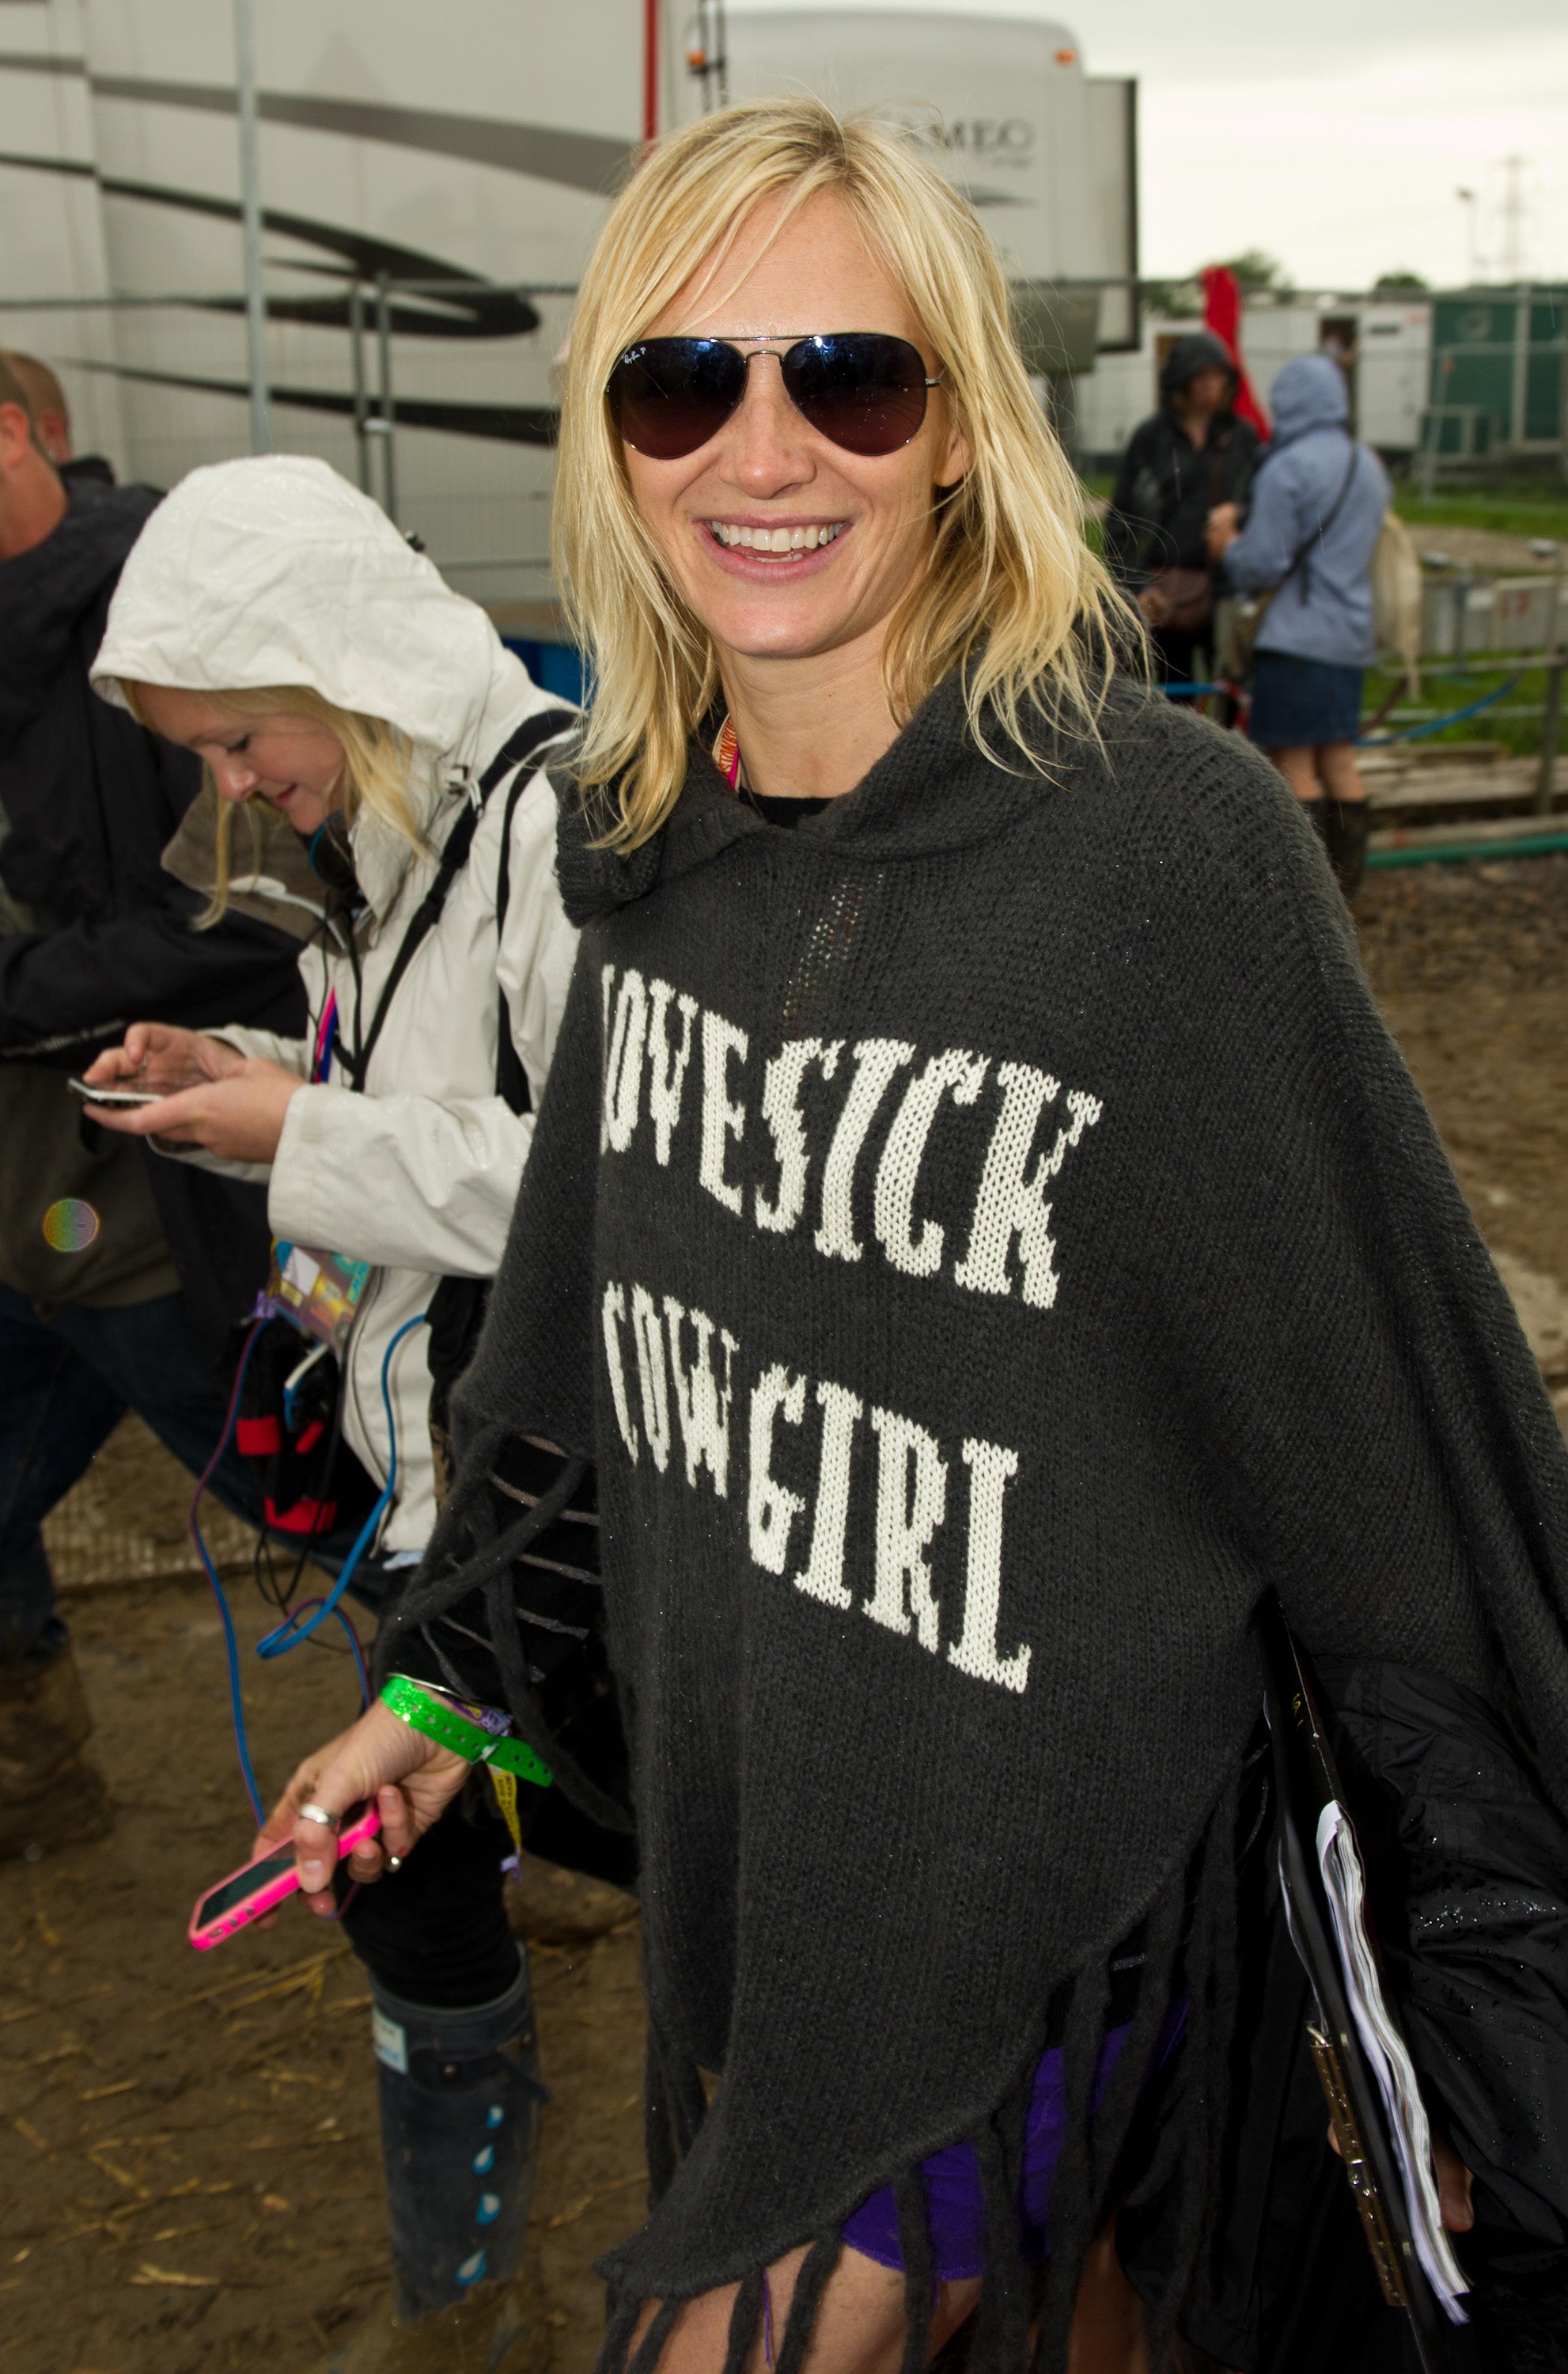 Whiley is the BBC’s main presenter at the festival on Worthy Farm in Somerset